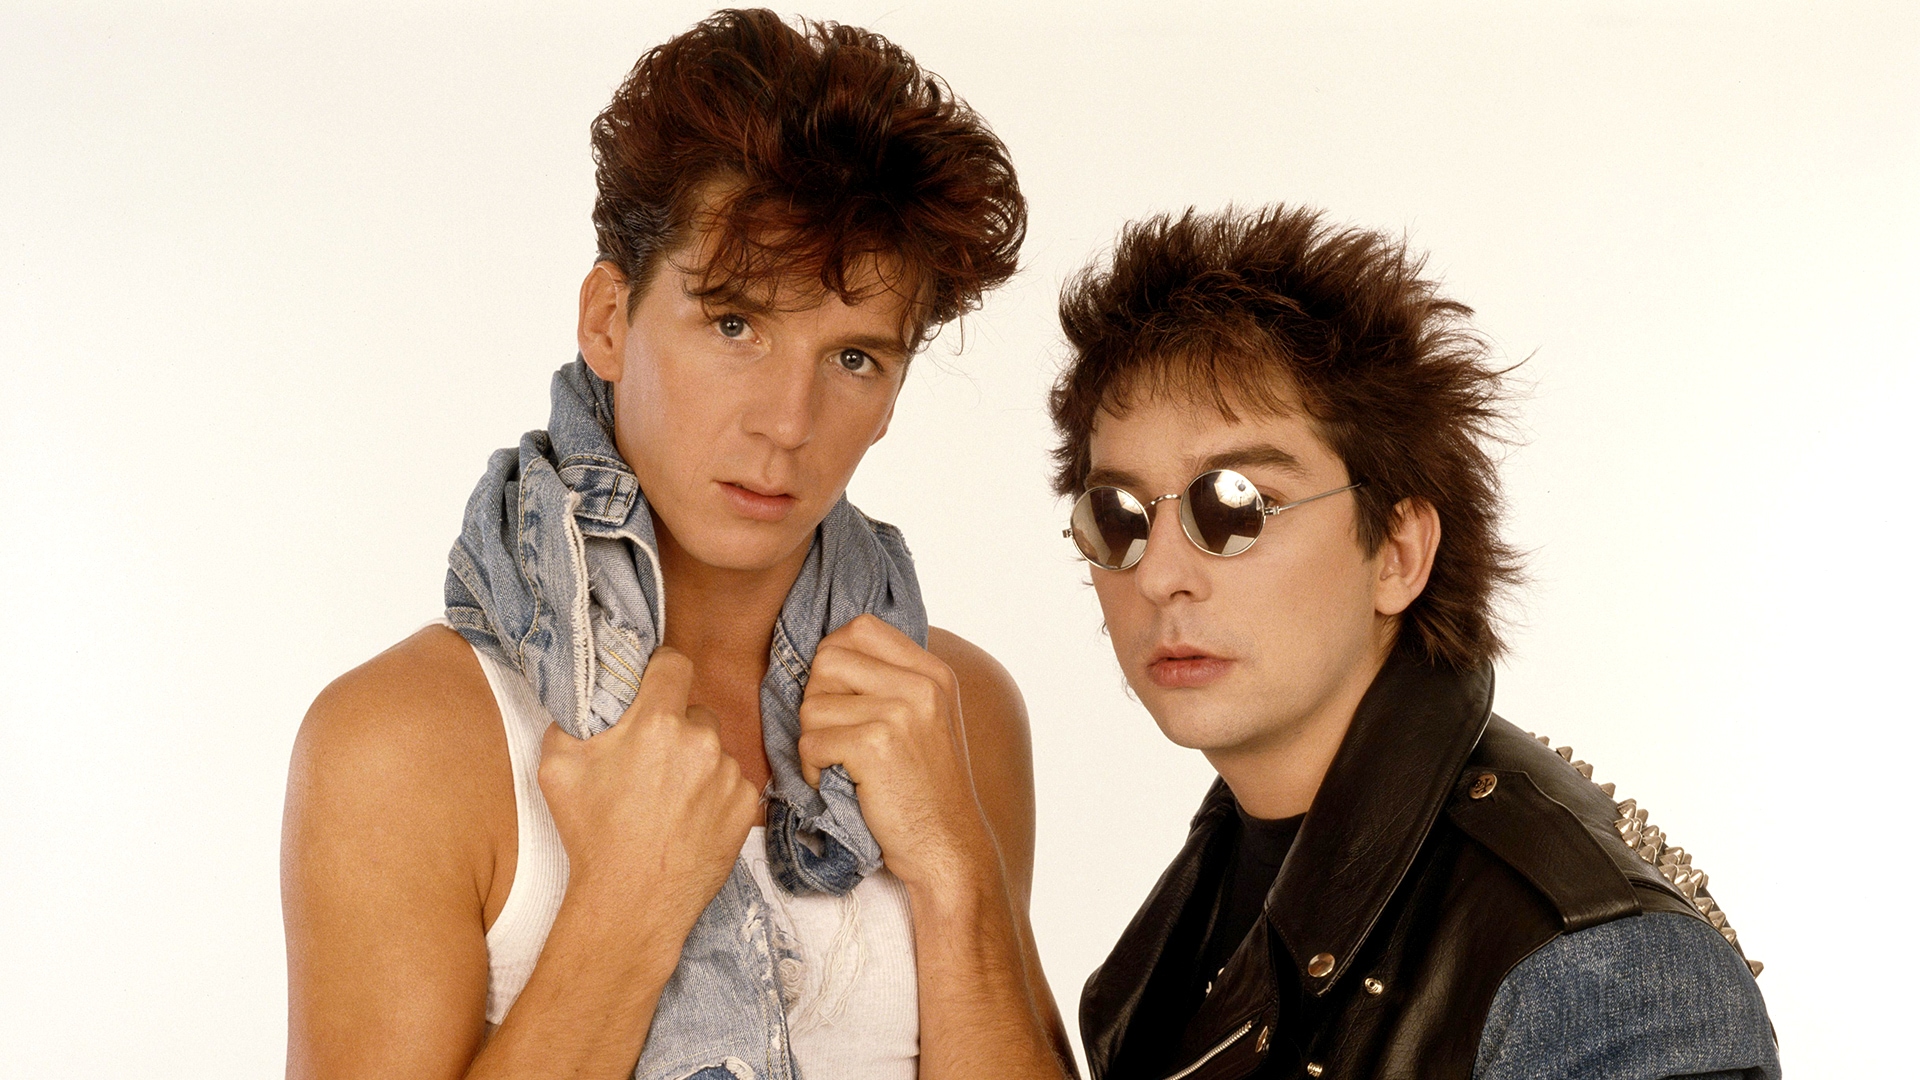 Rise To The Occasion av Climie Fisher